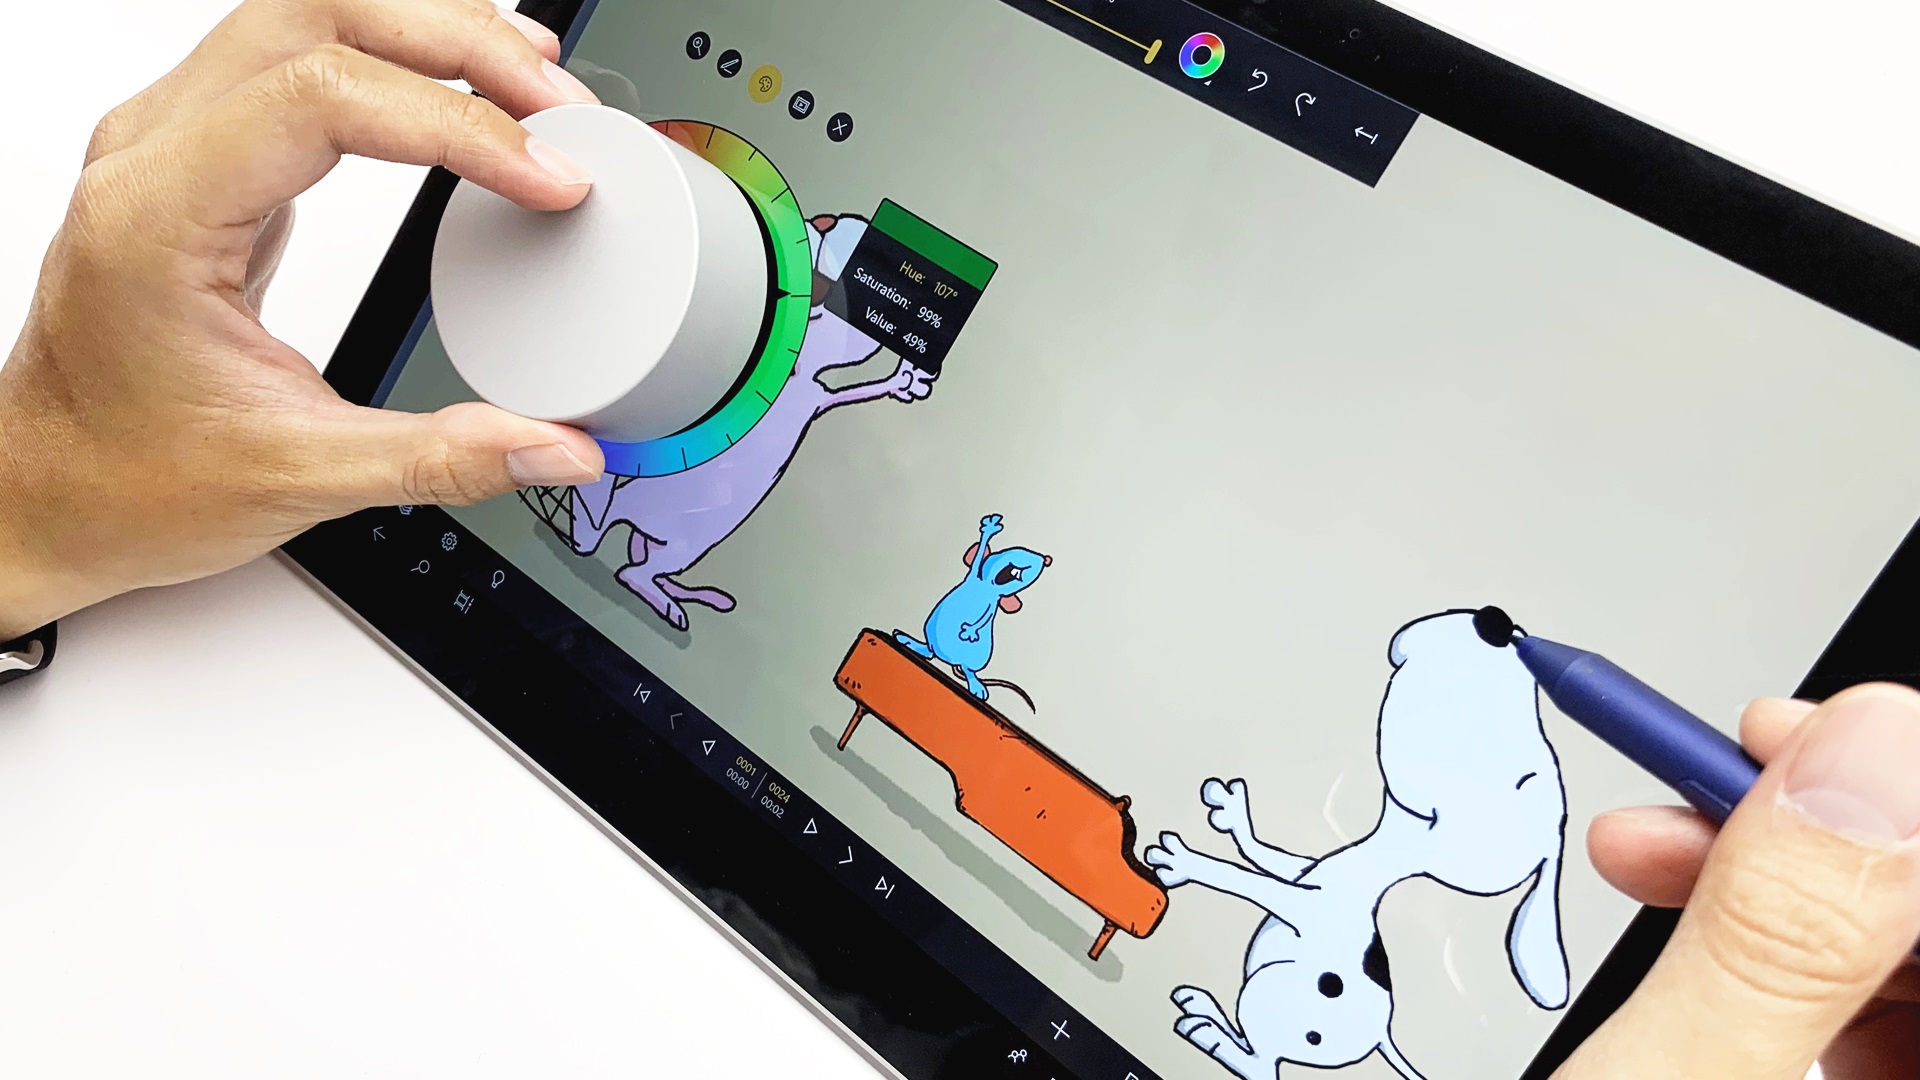 How to Work with Both Hands on Kdan Windows Apps with Surface Dial